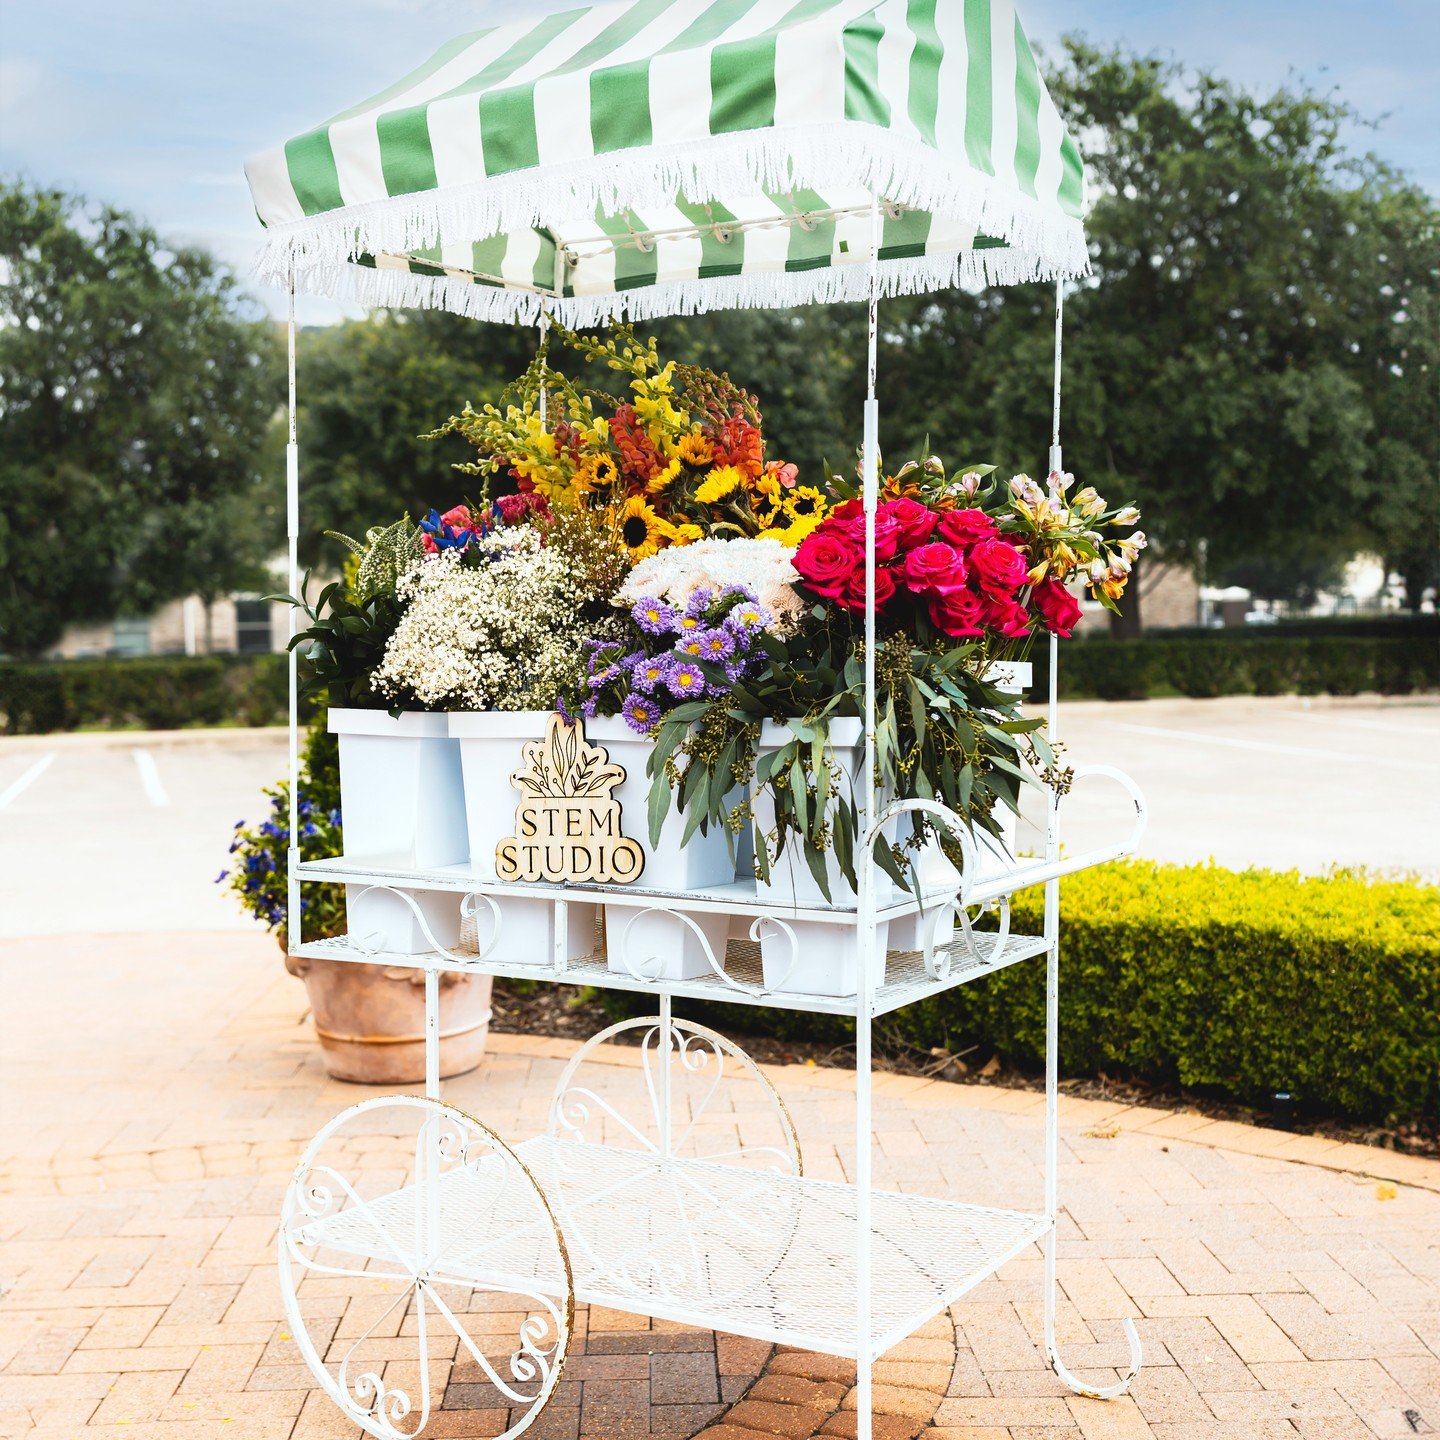 I'm so excited, I just can't wait! The Stem Studio cart is ready for booking. The website goes live TOMORROW -- link in bio!

#flowercart #houstonflowercart #flowercartrental #houstonflowers #flowerworkshops #houstonbridalshower #houstonbabyshower #f